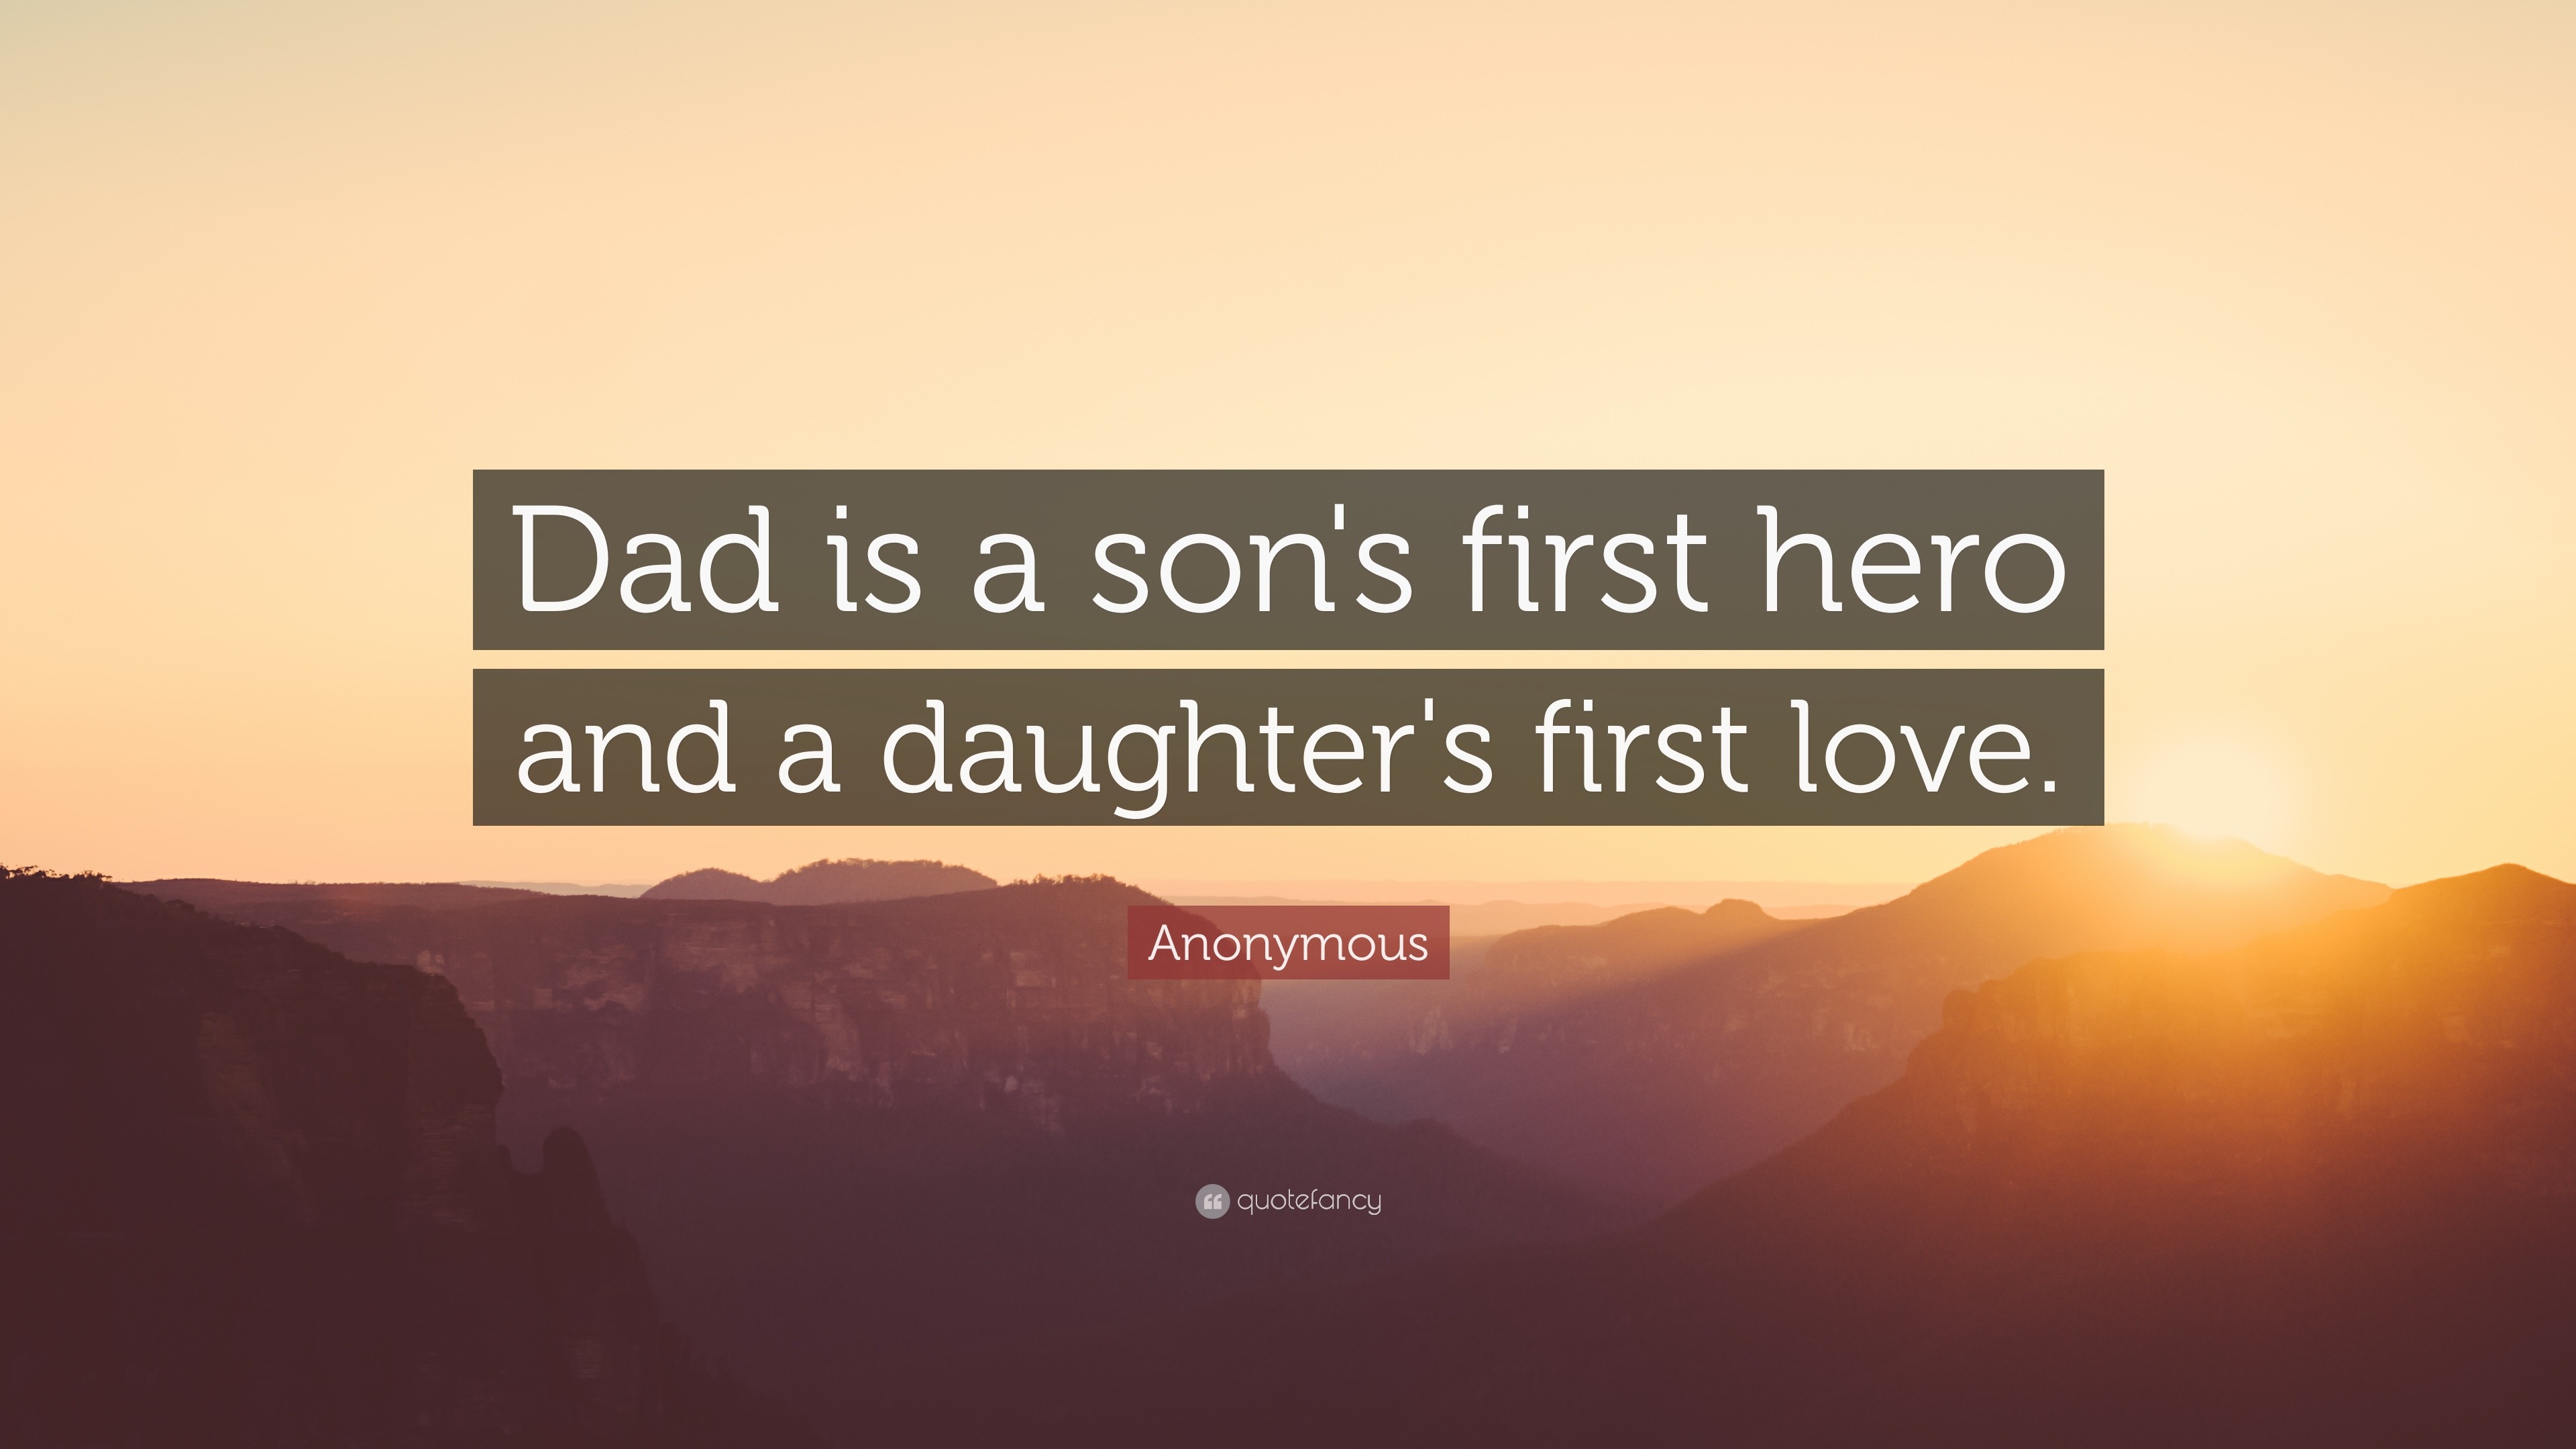 Anonymous Quote “Dad is a son s first hero and a daughter s first love